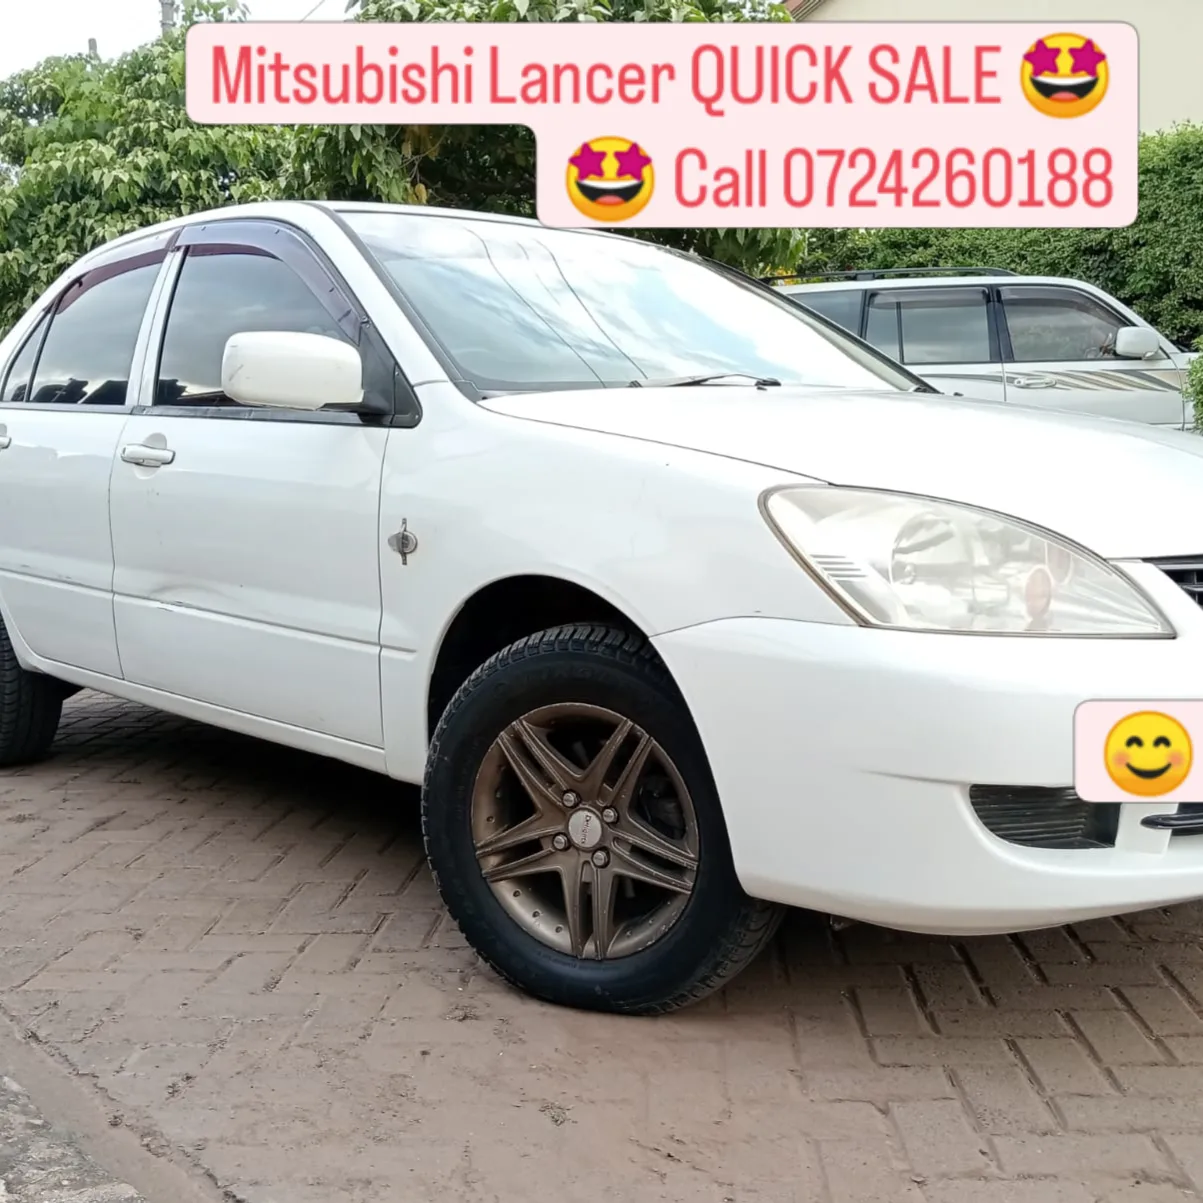 Car/motor vehicle Cars For Sale in Kenya-MITSUBISHI LANCER QUICK SALE You Pay 30% Deposit Trade in OK Hire purchase installments new 9